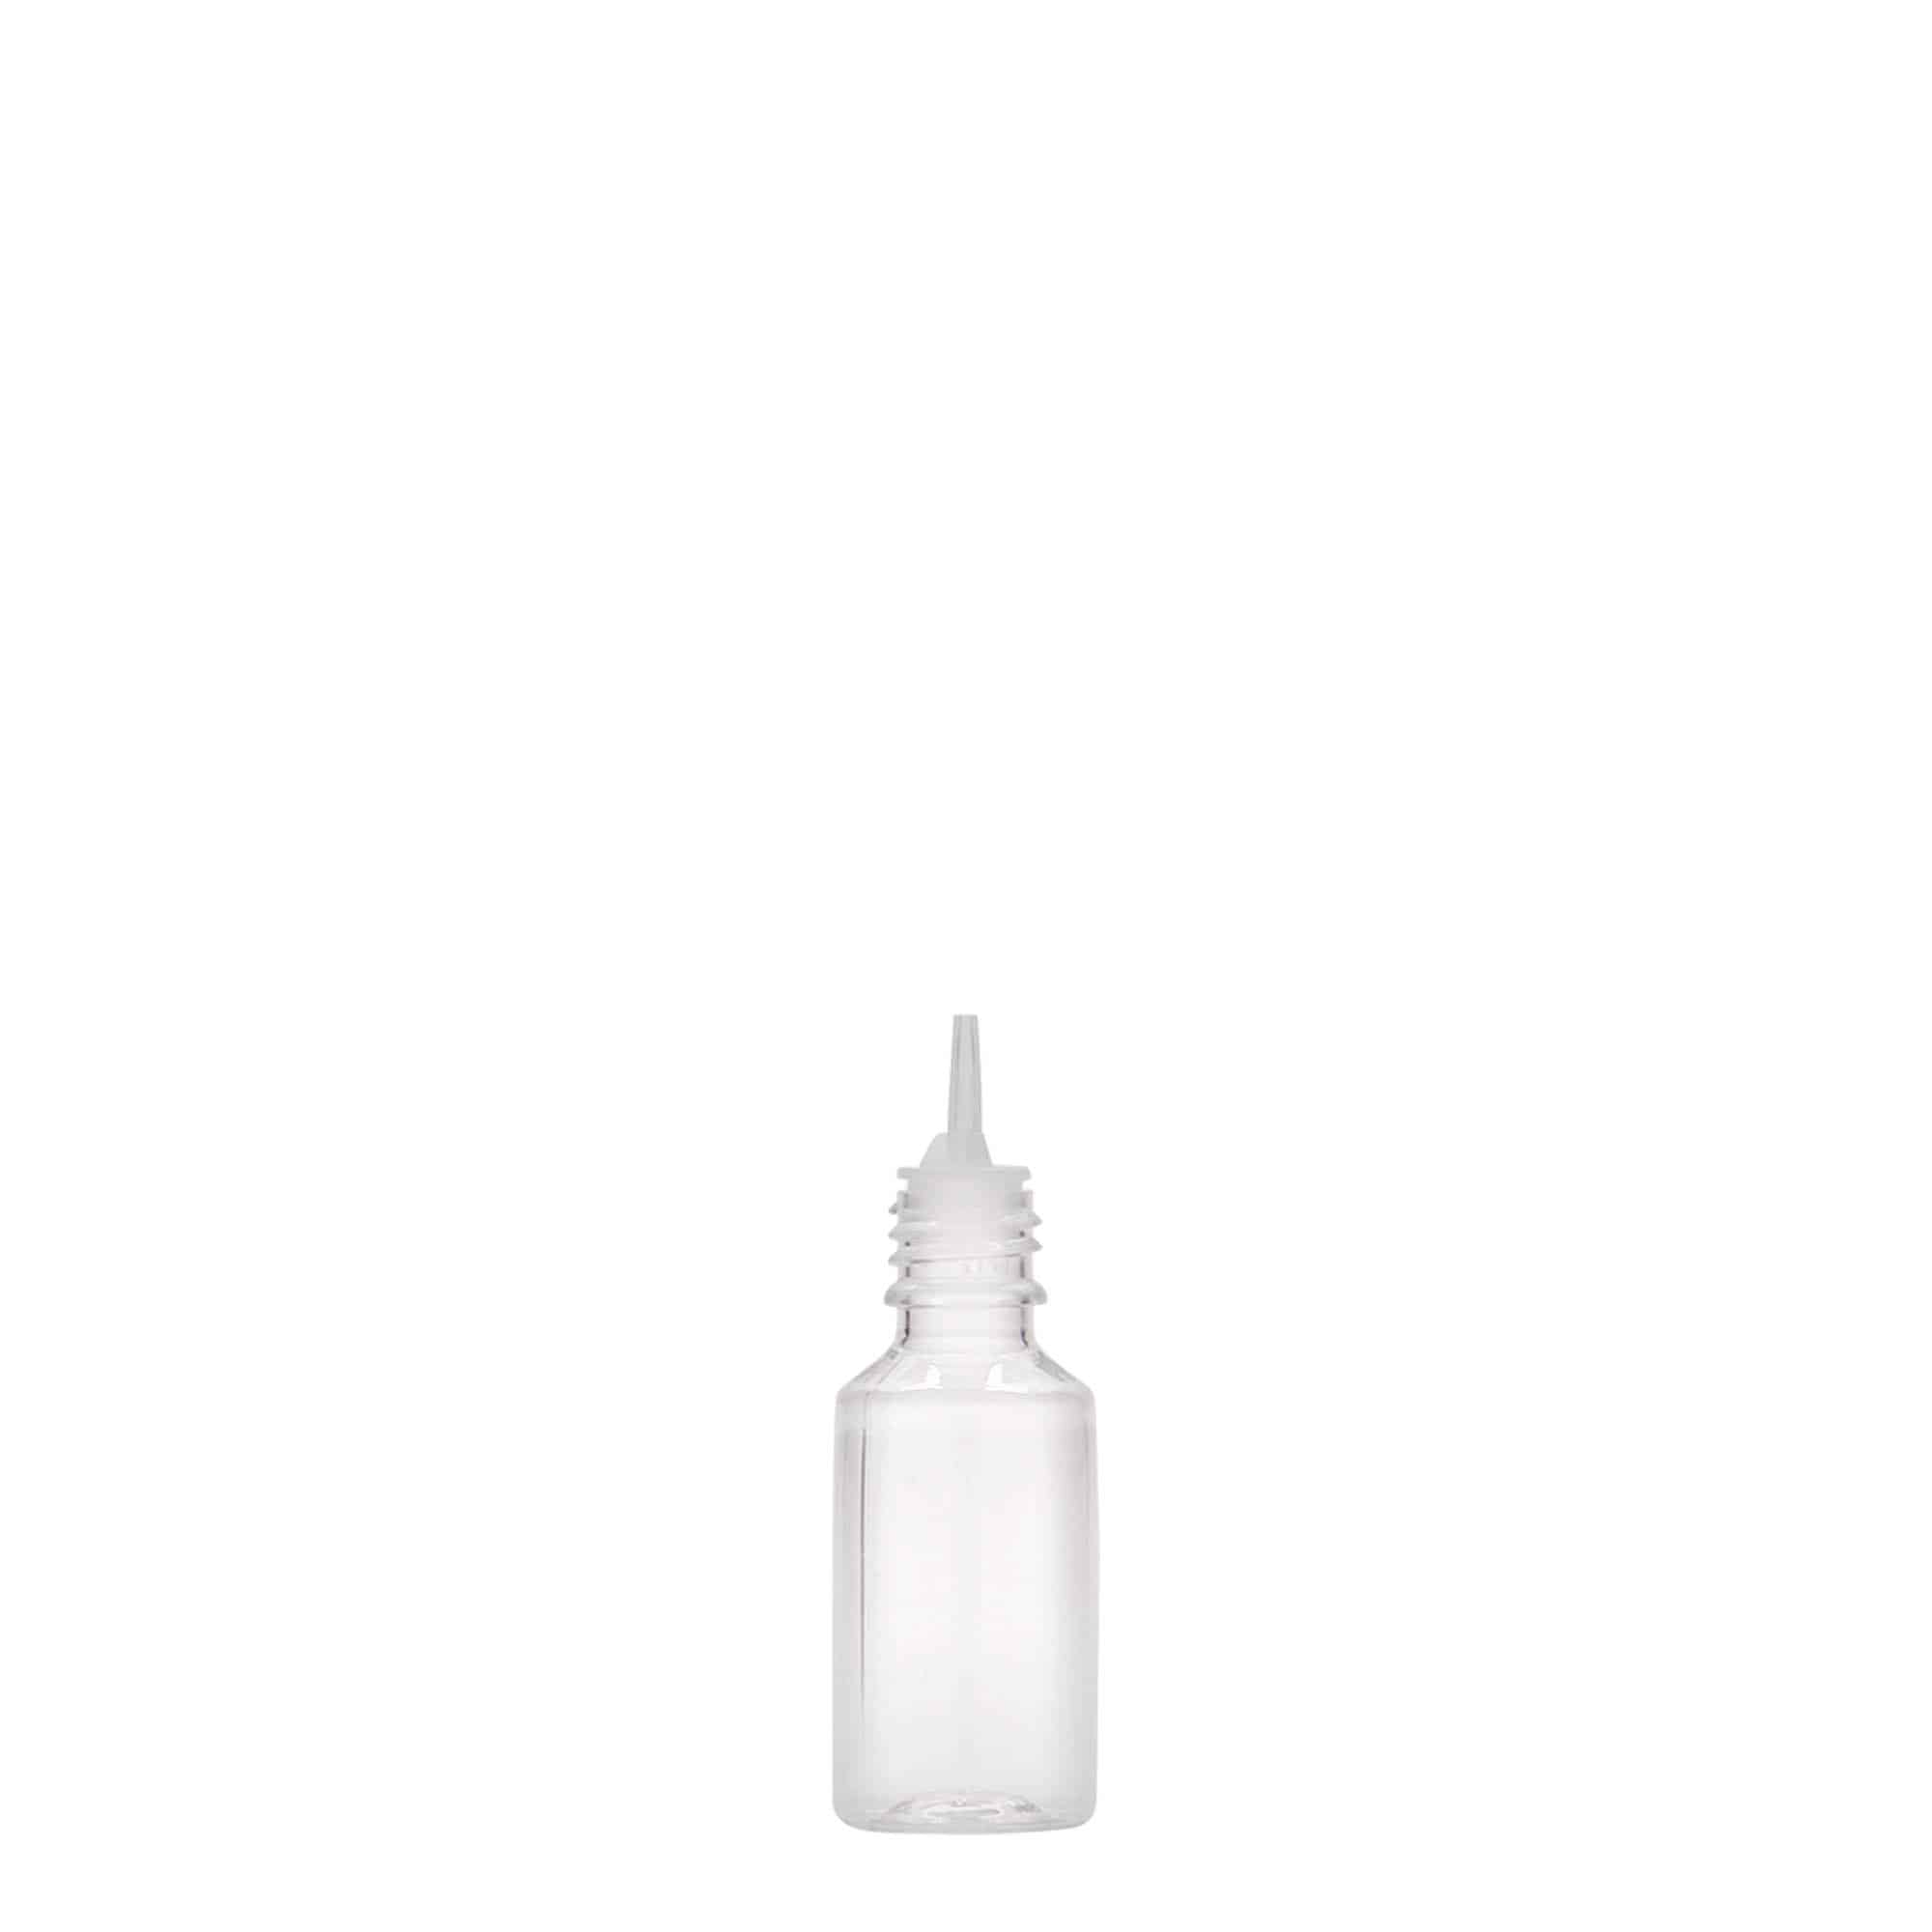 10 ml PET bottle 'E-Liquid' with quality seal and child safety lock, plastic, closure: screw cap